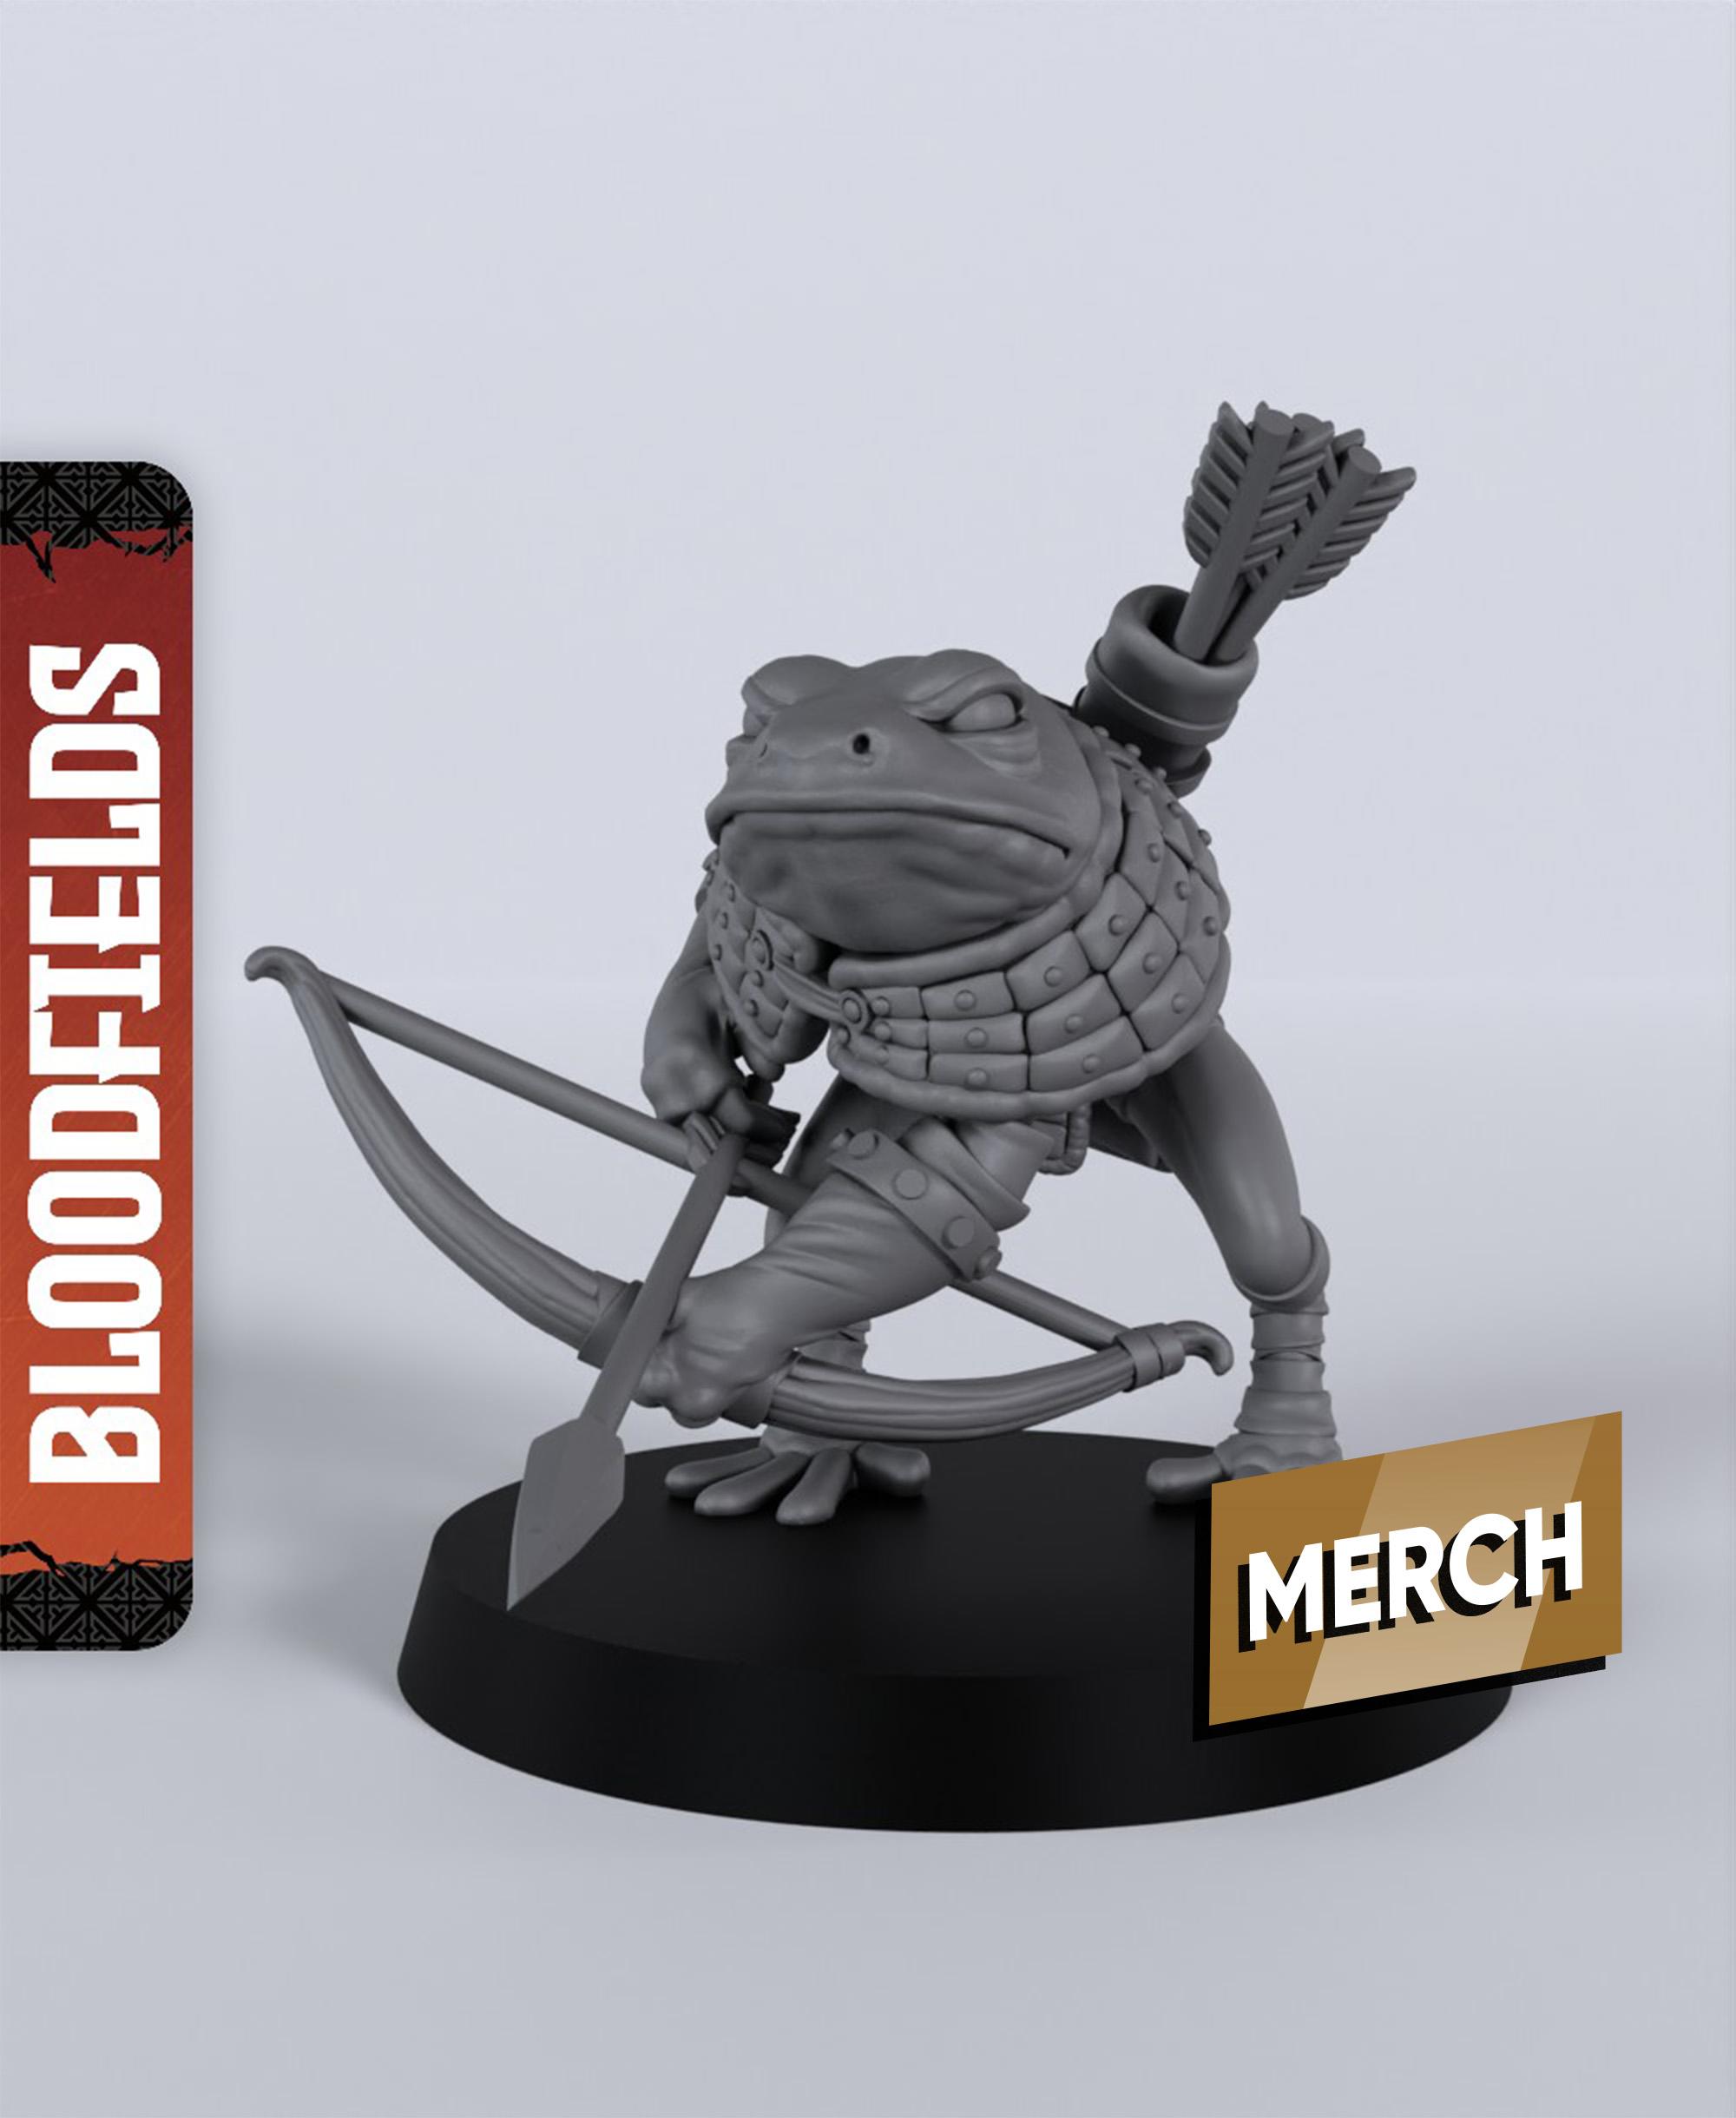 Ribbits the Elusive - With Free Dragon Warhammer - 5e DnD Inspired for RPG and Wargamers 3d model